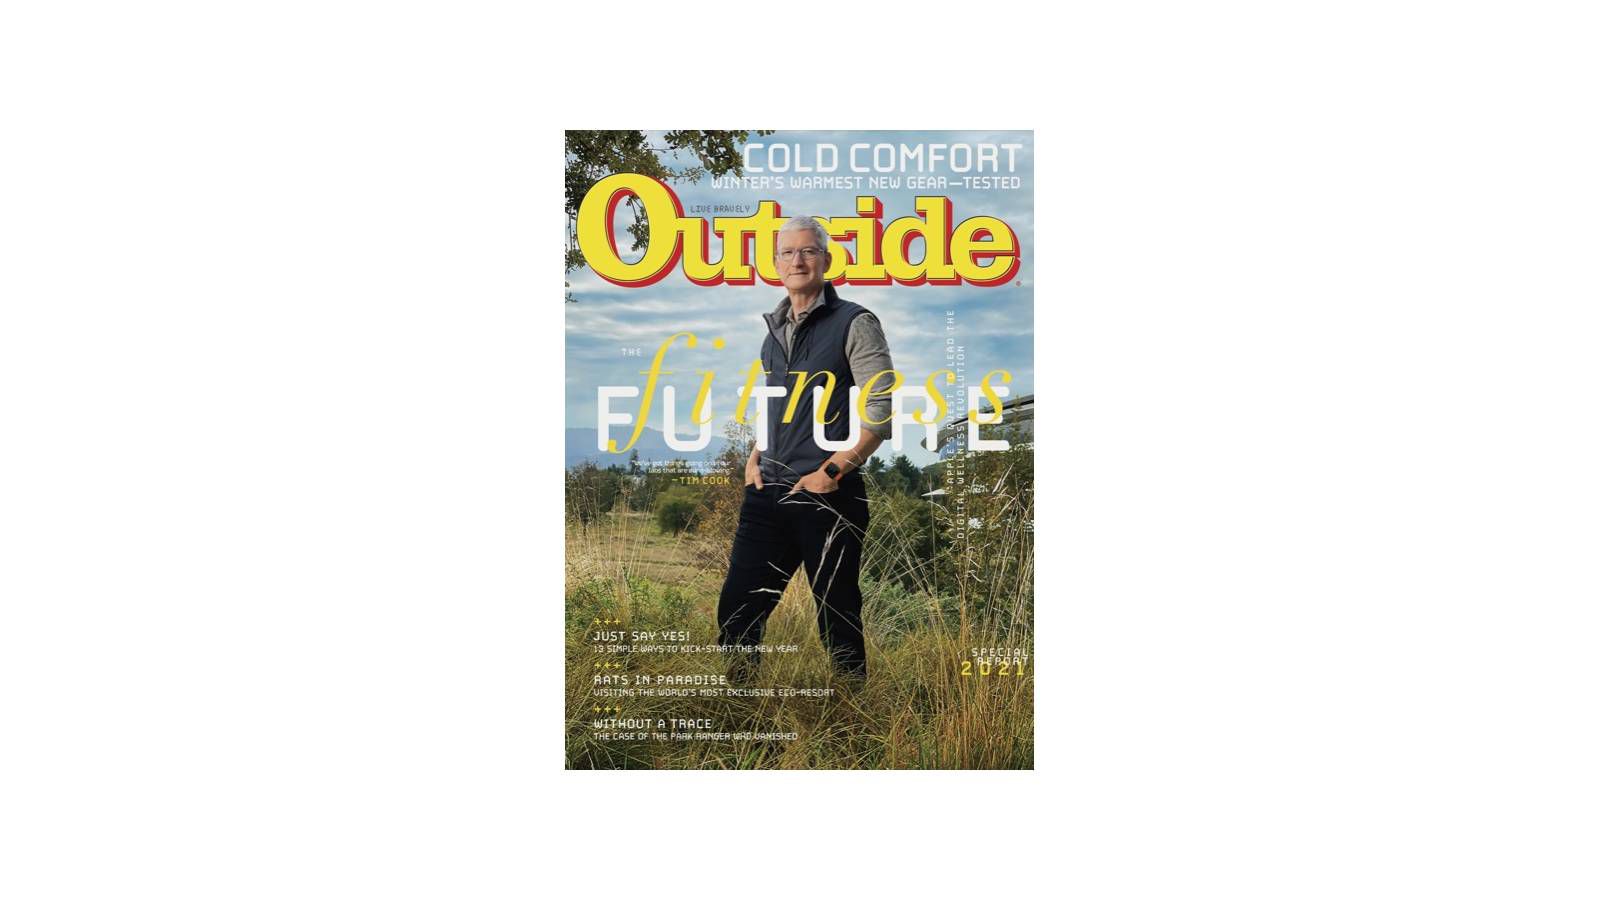 Tim Cook featured on cover of outdoor magazine, talks about health and wellness